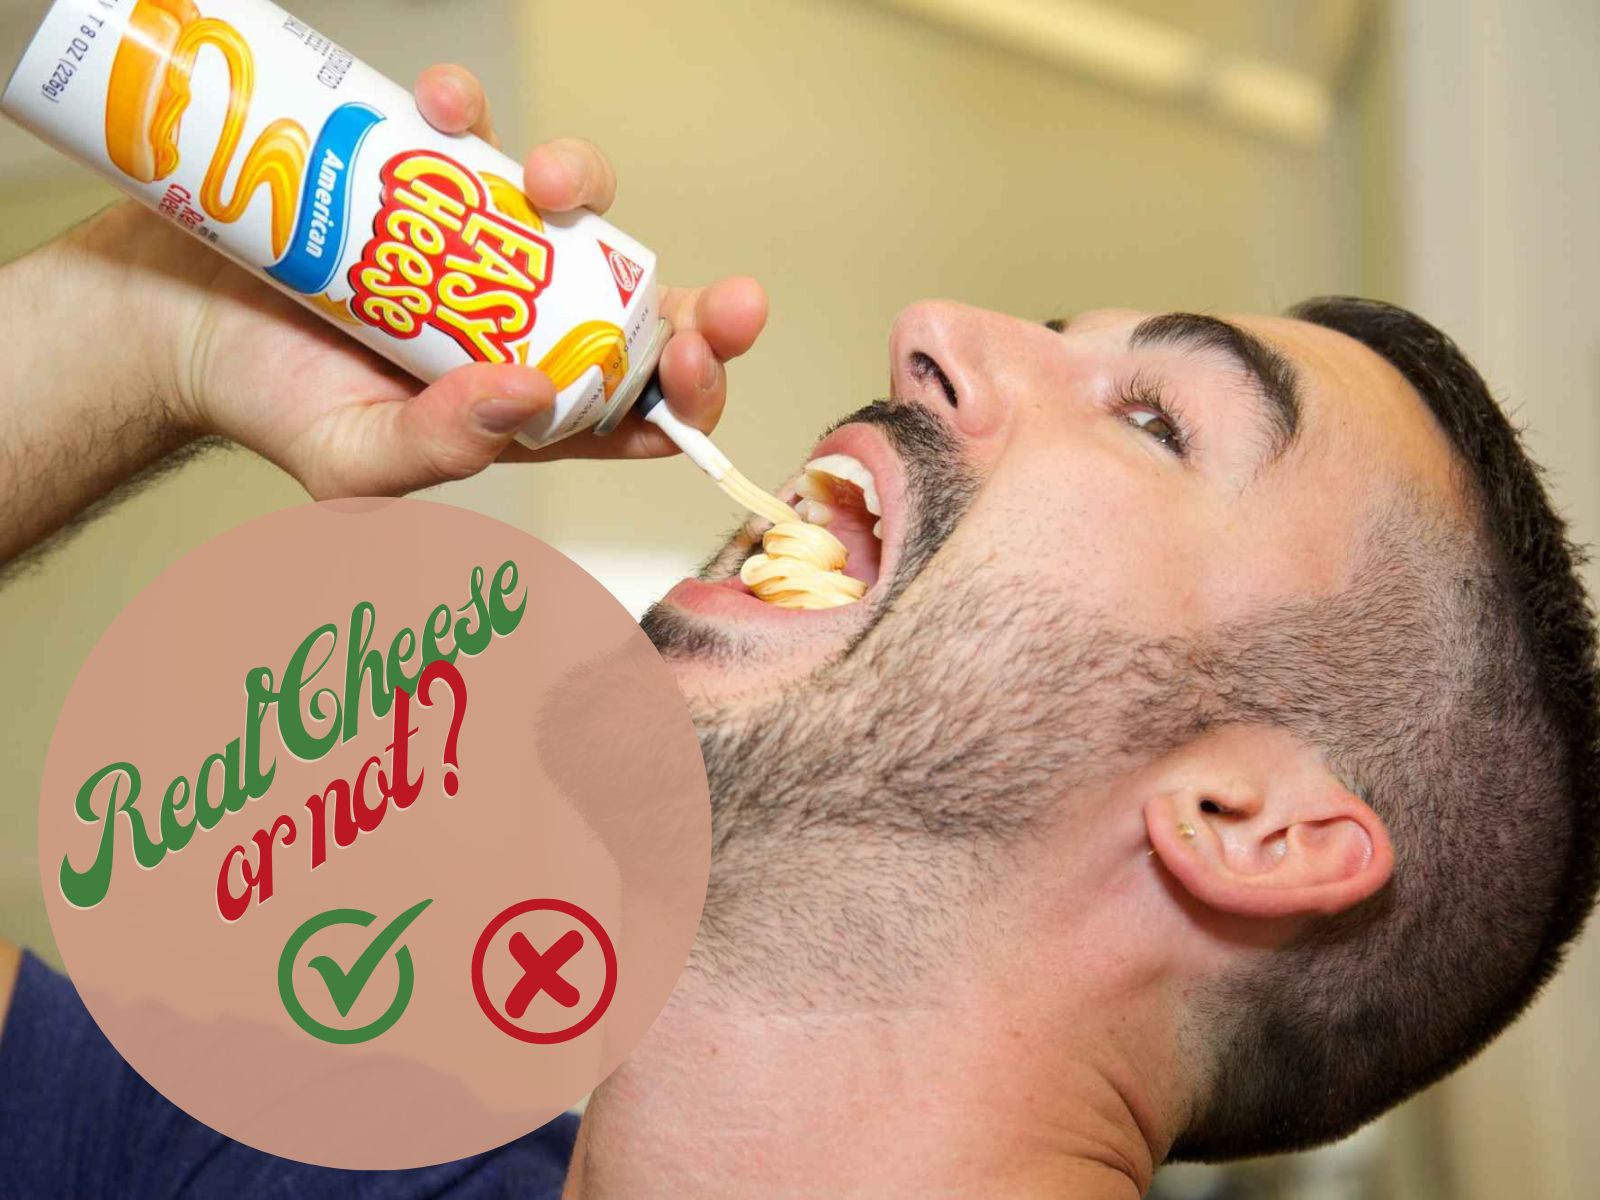 Is Mondelēz's Easy Cheese Real Cheese or Not? (Definition Test)